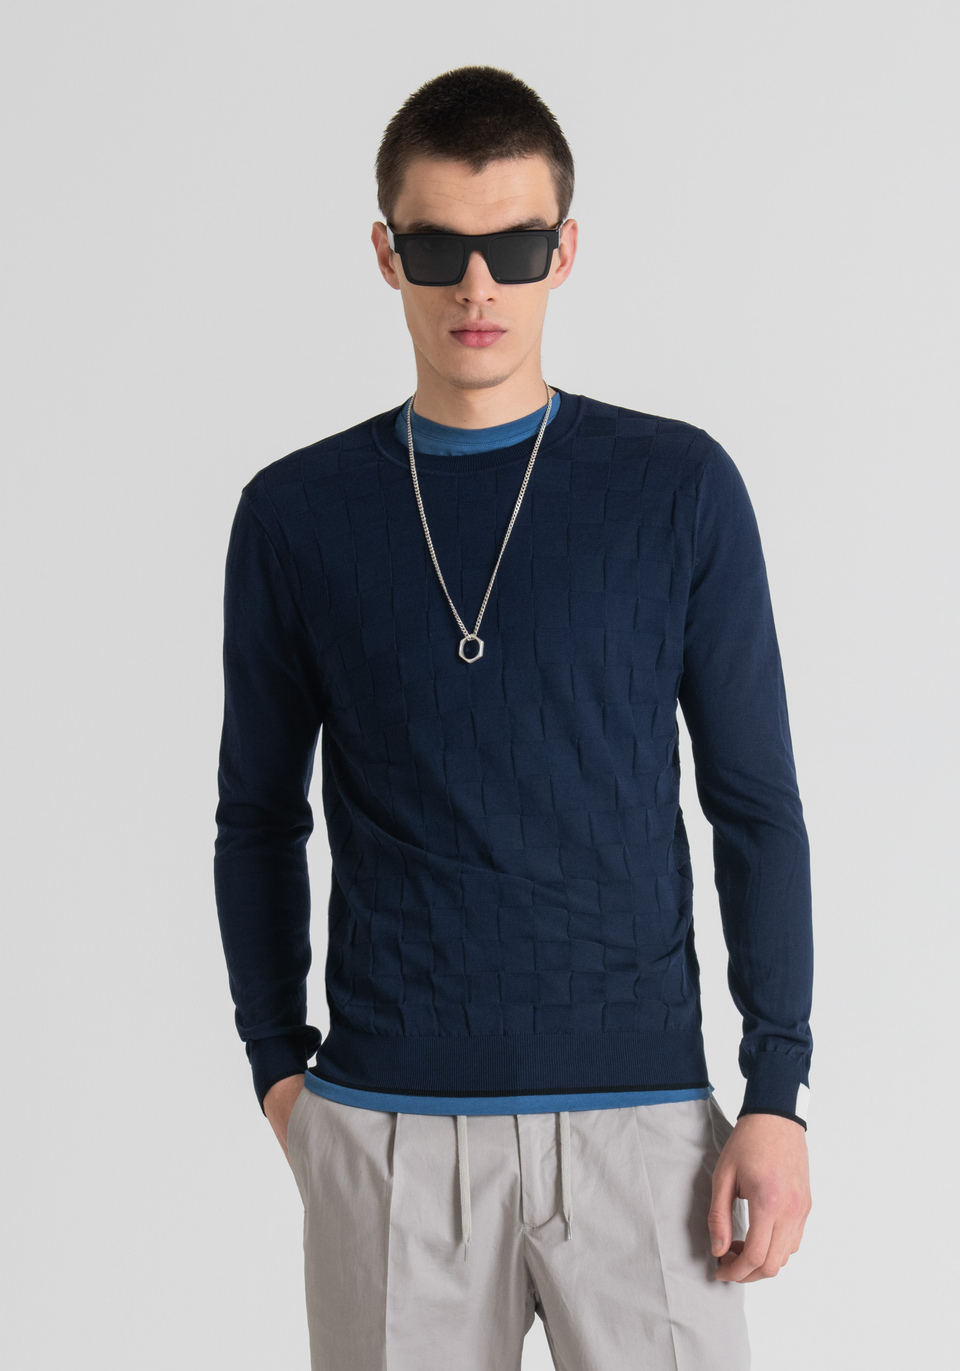 SLIM-FIT SWEATER IN 100% COMPACT COTTON YARN WITH A GEOMETRIC JACQUARD PATTERN - Antony Morato Online Shop